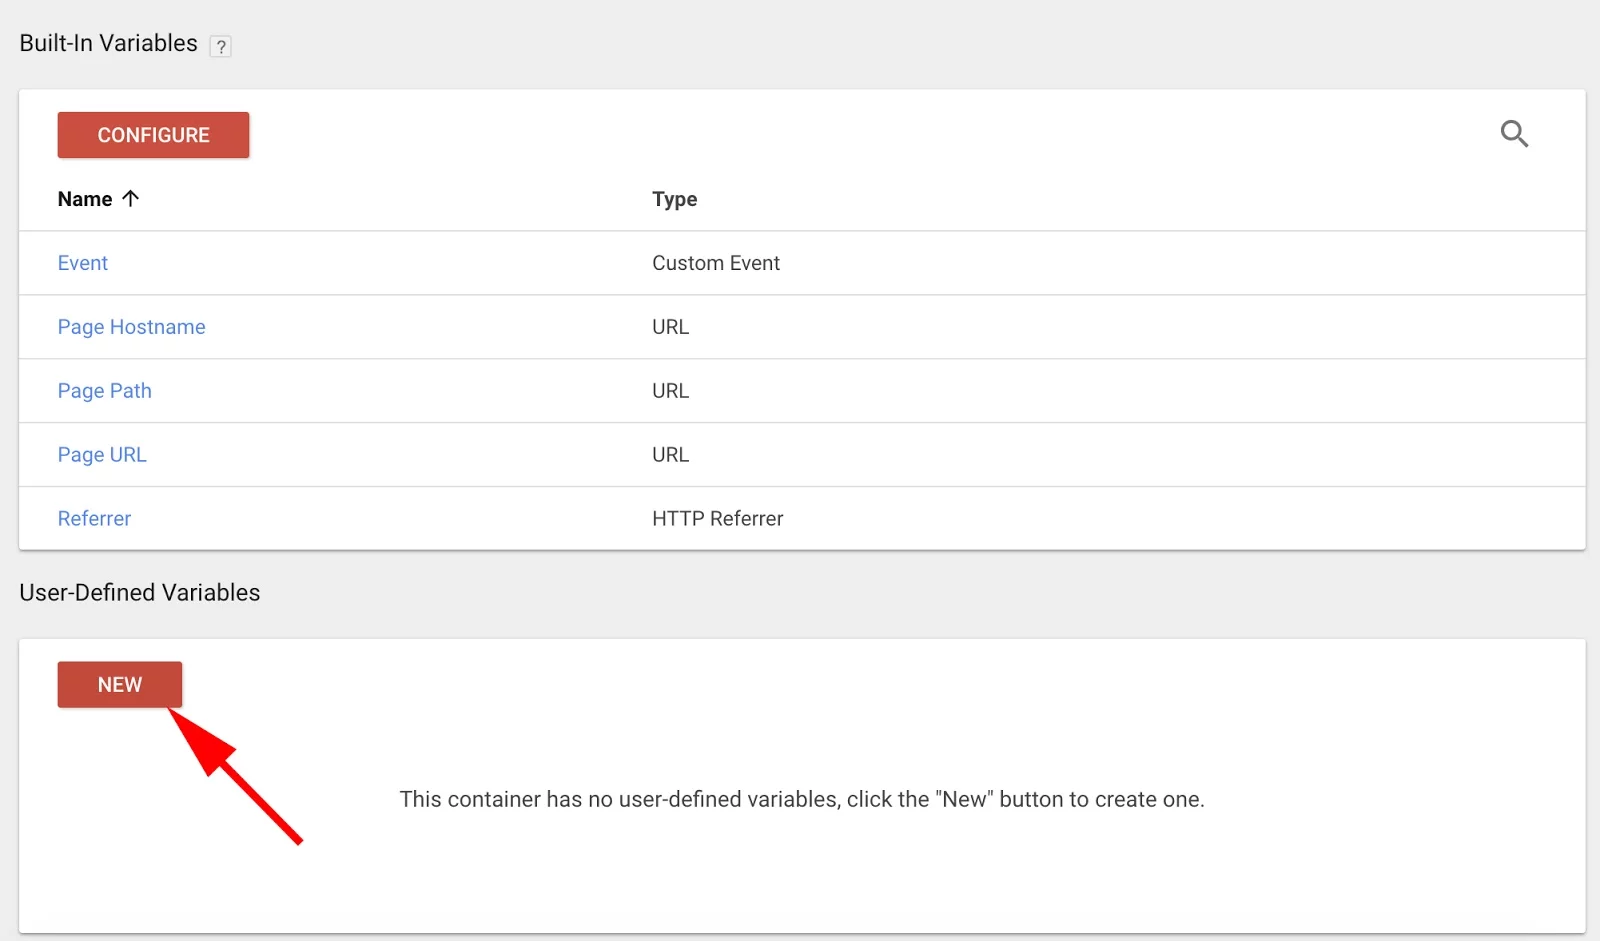 Getting to Grips with Google Tag Manager